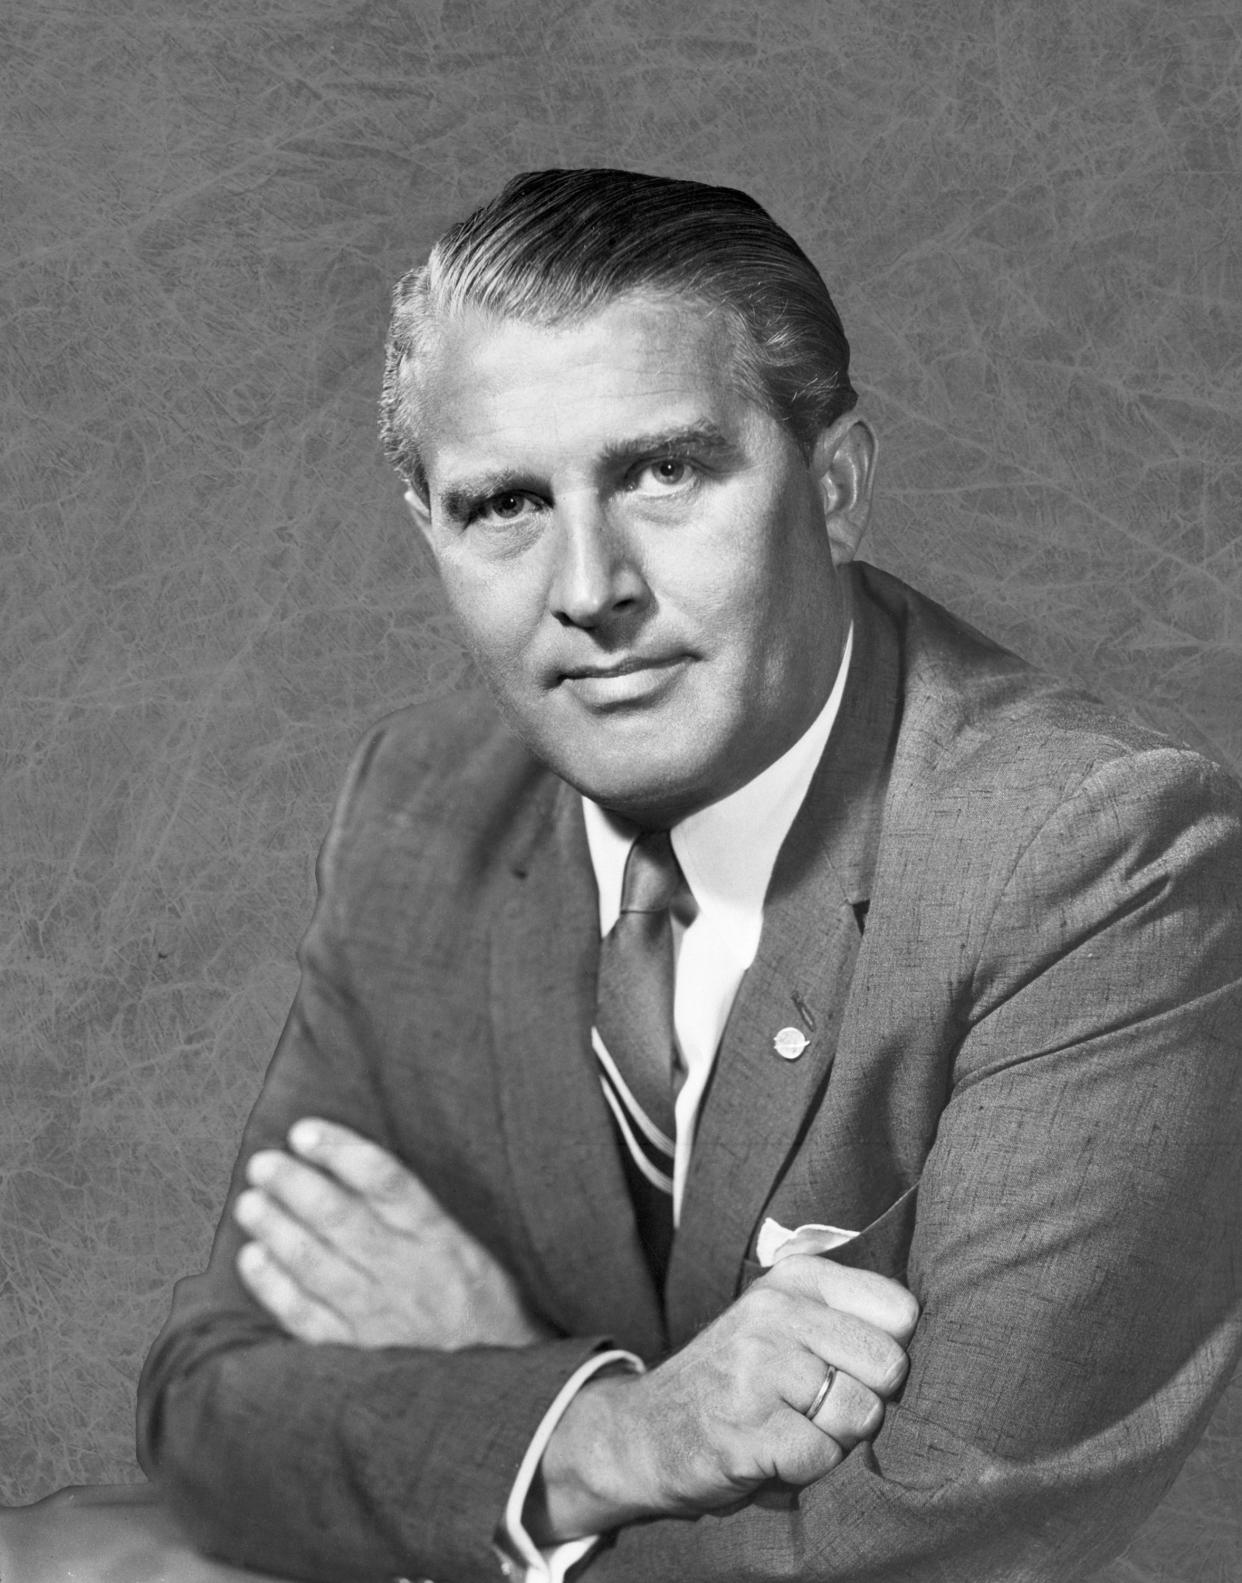 Dr. Wernher von Braun (1912–1977) was one of the most important rocket developers and champions of space exploration in the twentieth century. As a youth he became enamored with the possibilities of space exploration by reading the work of Hermann Oberth, whose 1923 book The Rocket into Interplanetary Space, prompted von Braun to master calculus and trigonometry so he could understand the physics of rocketry.